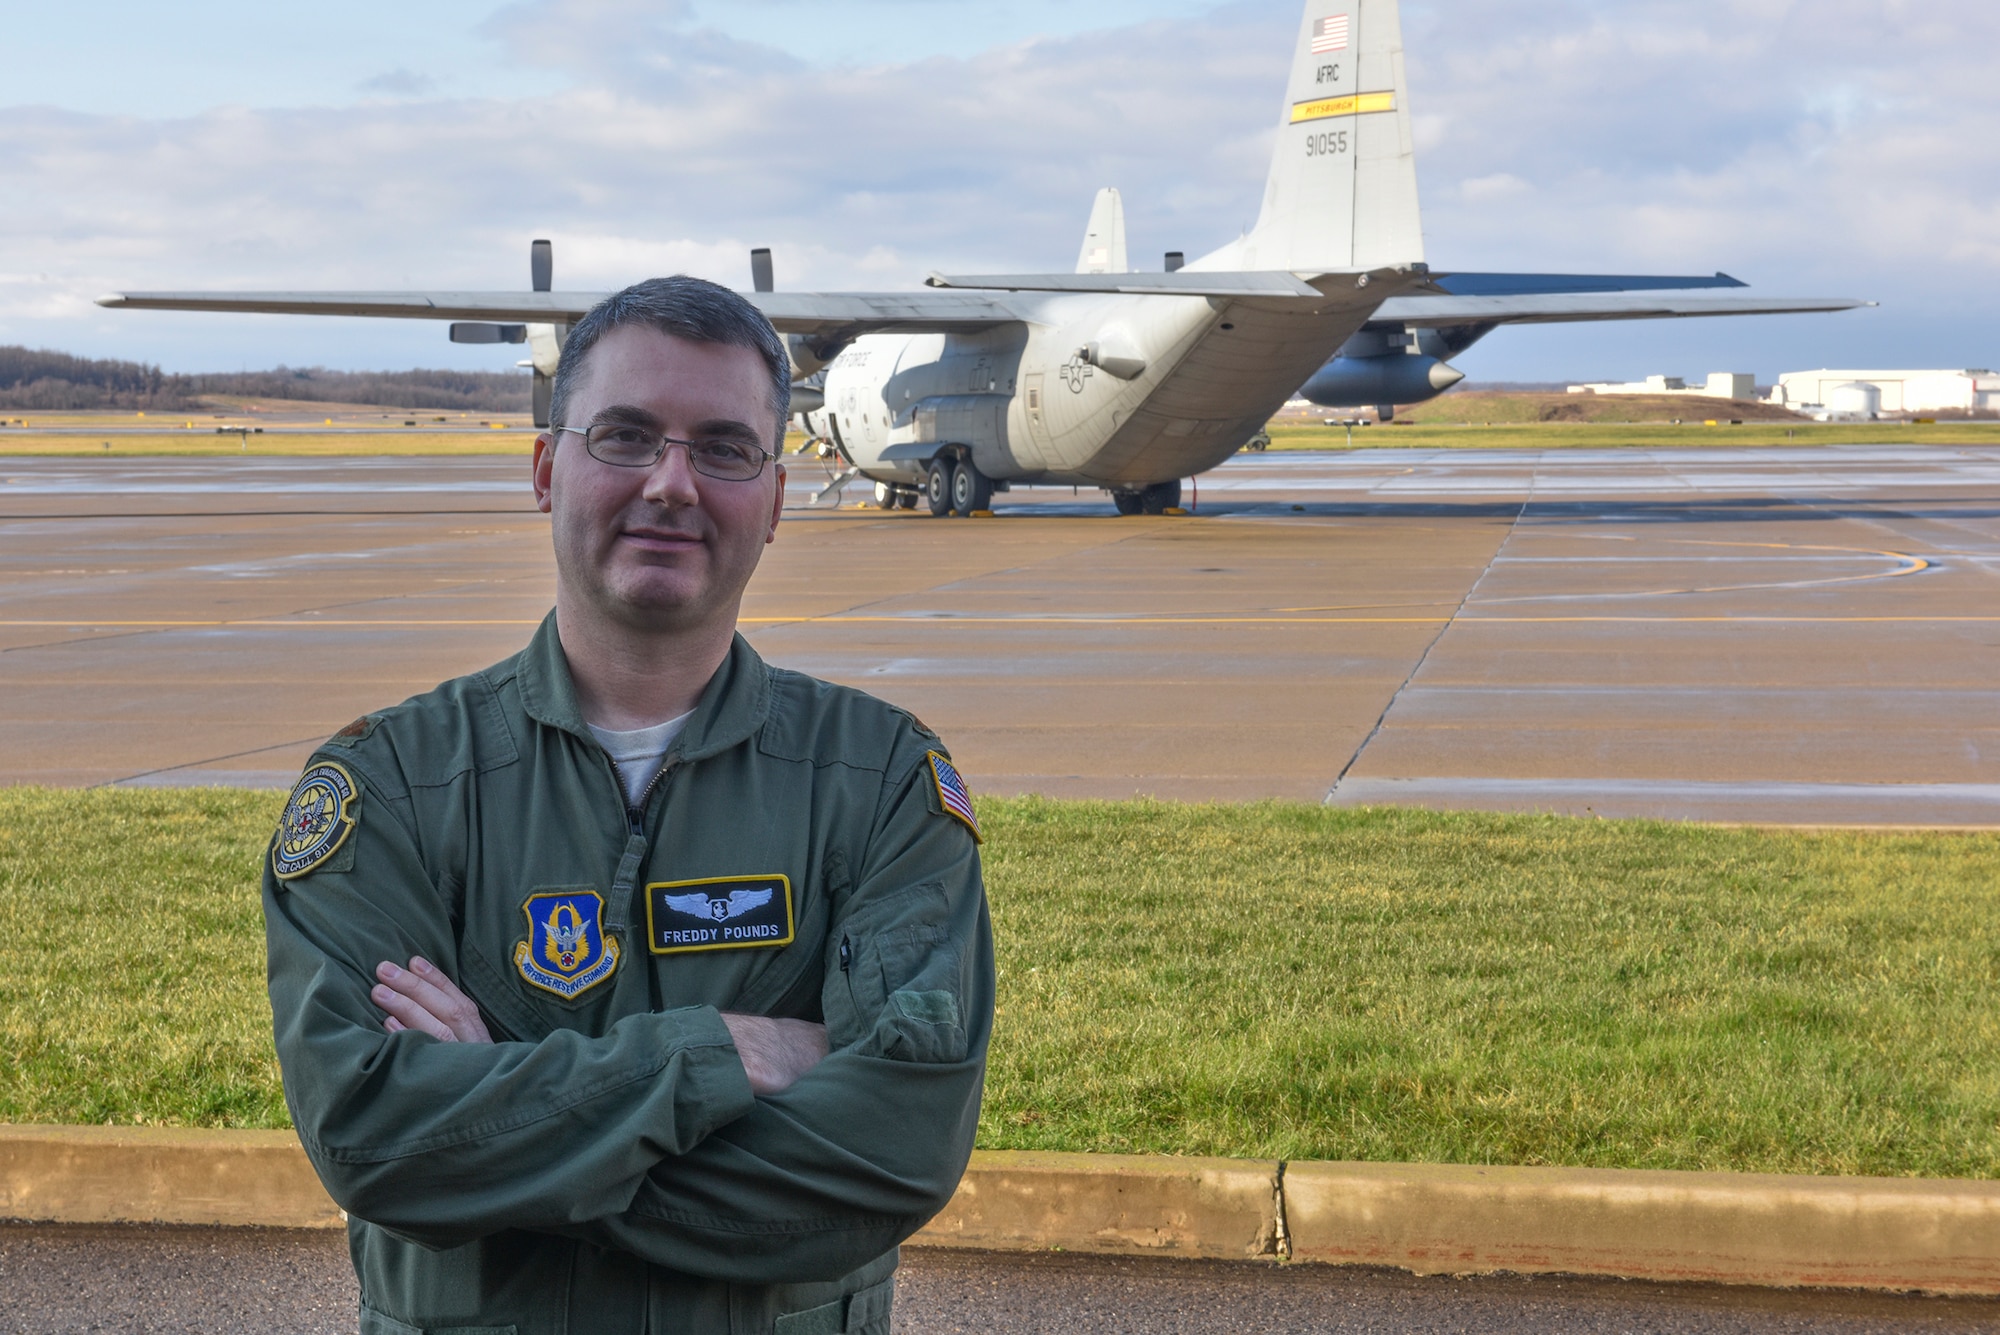 Maj. Fred Pounds, flight commander of clinical management with the 911th Aeromedical Evacuation Squadron, stands in front of a C-130 Hercules at the Pittsburgh International Airport Air Reserve Station, Jan. 9, 2016. Pounds helped to save a woman’s life during a Yellow Ribbon Event in Orlando, Florida, in December. (U.S. Air Force photo by Senior Airman Marjorie A. Bowlden)
